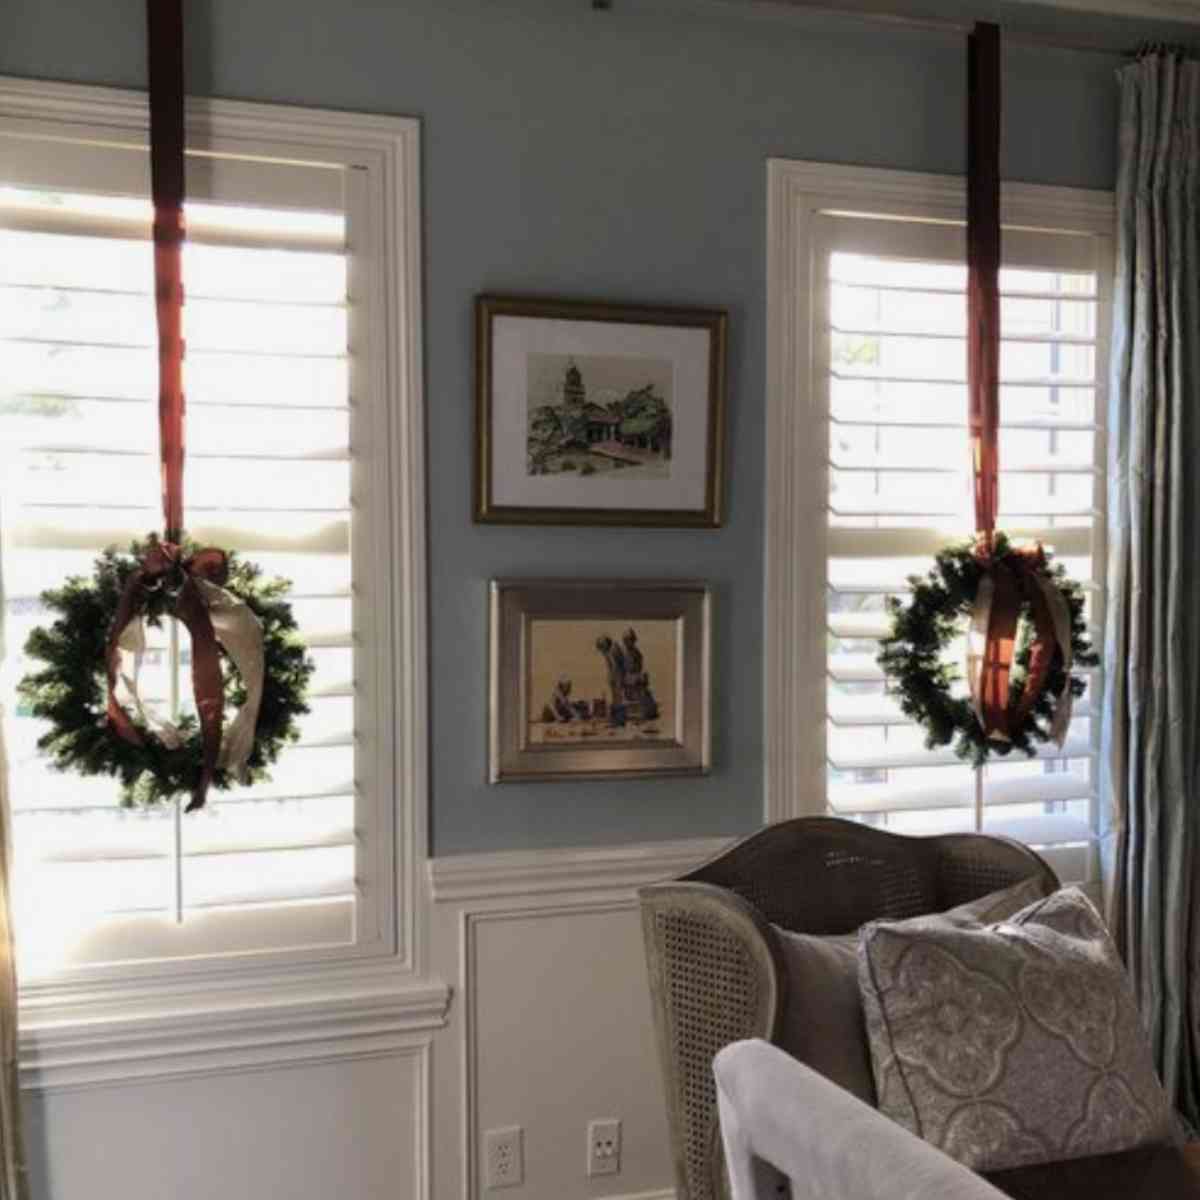 How to Hang a Wreath with Ribbon